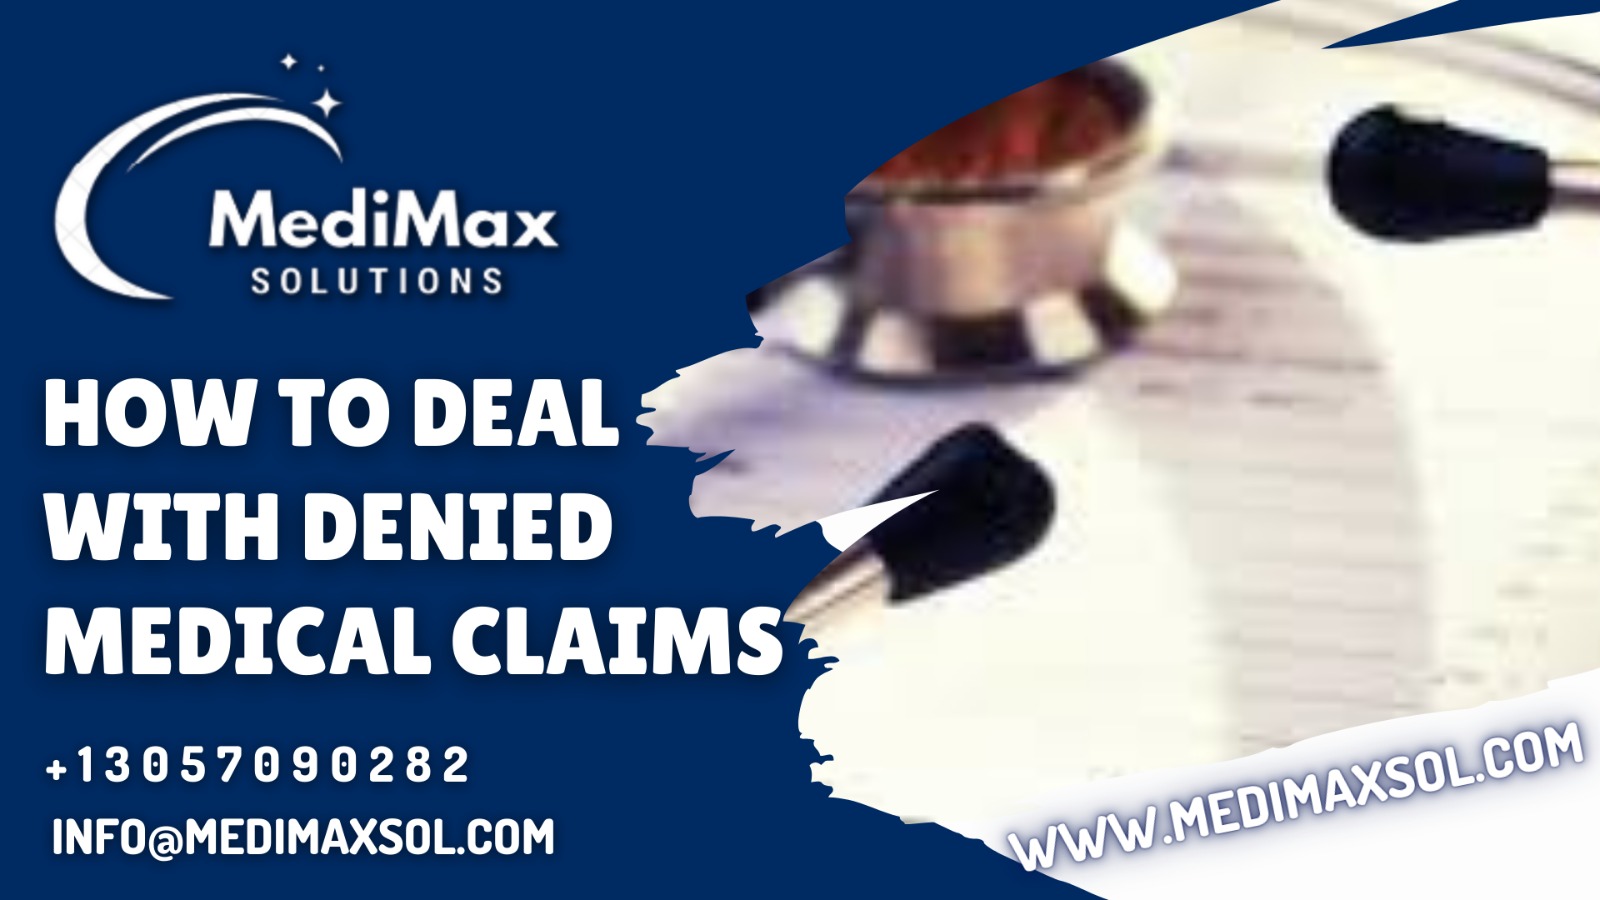 How to Deal with Denied Medical Claims